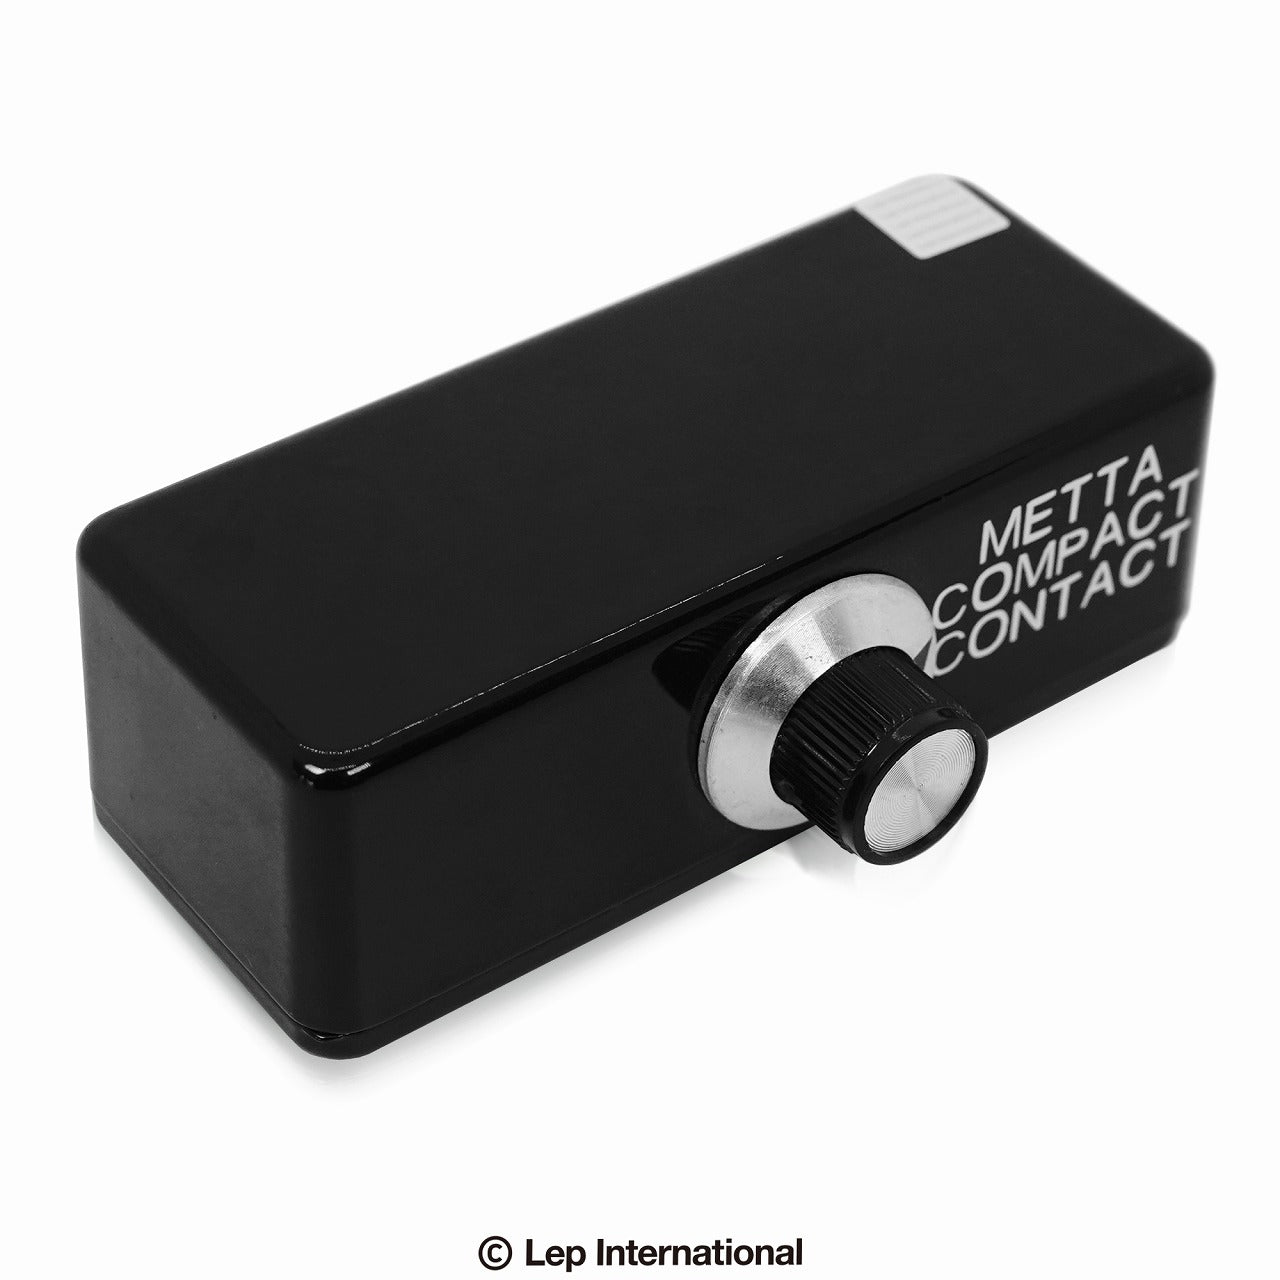 METTA AUDIO DEVICES/COMPACT CONTACT – LEP INTERNATIONAL